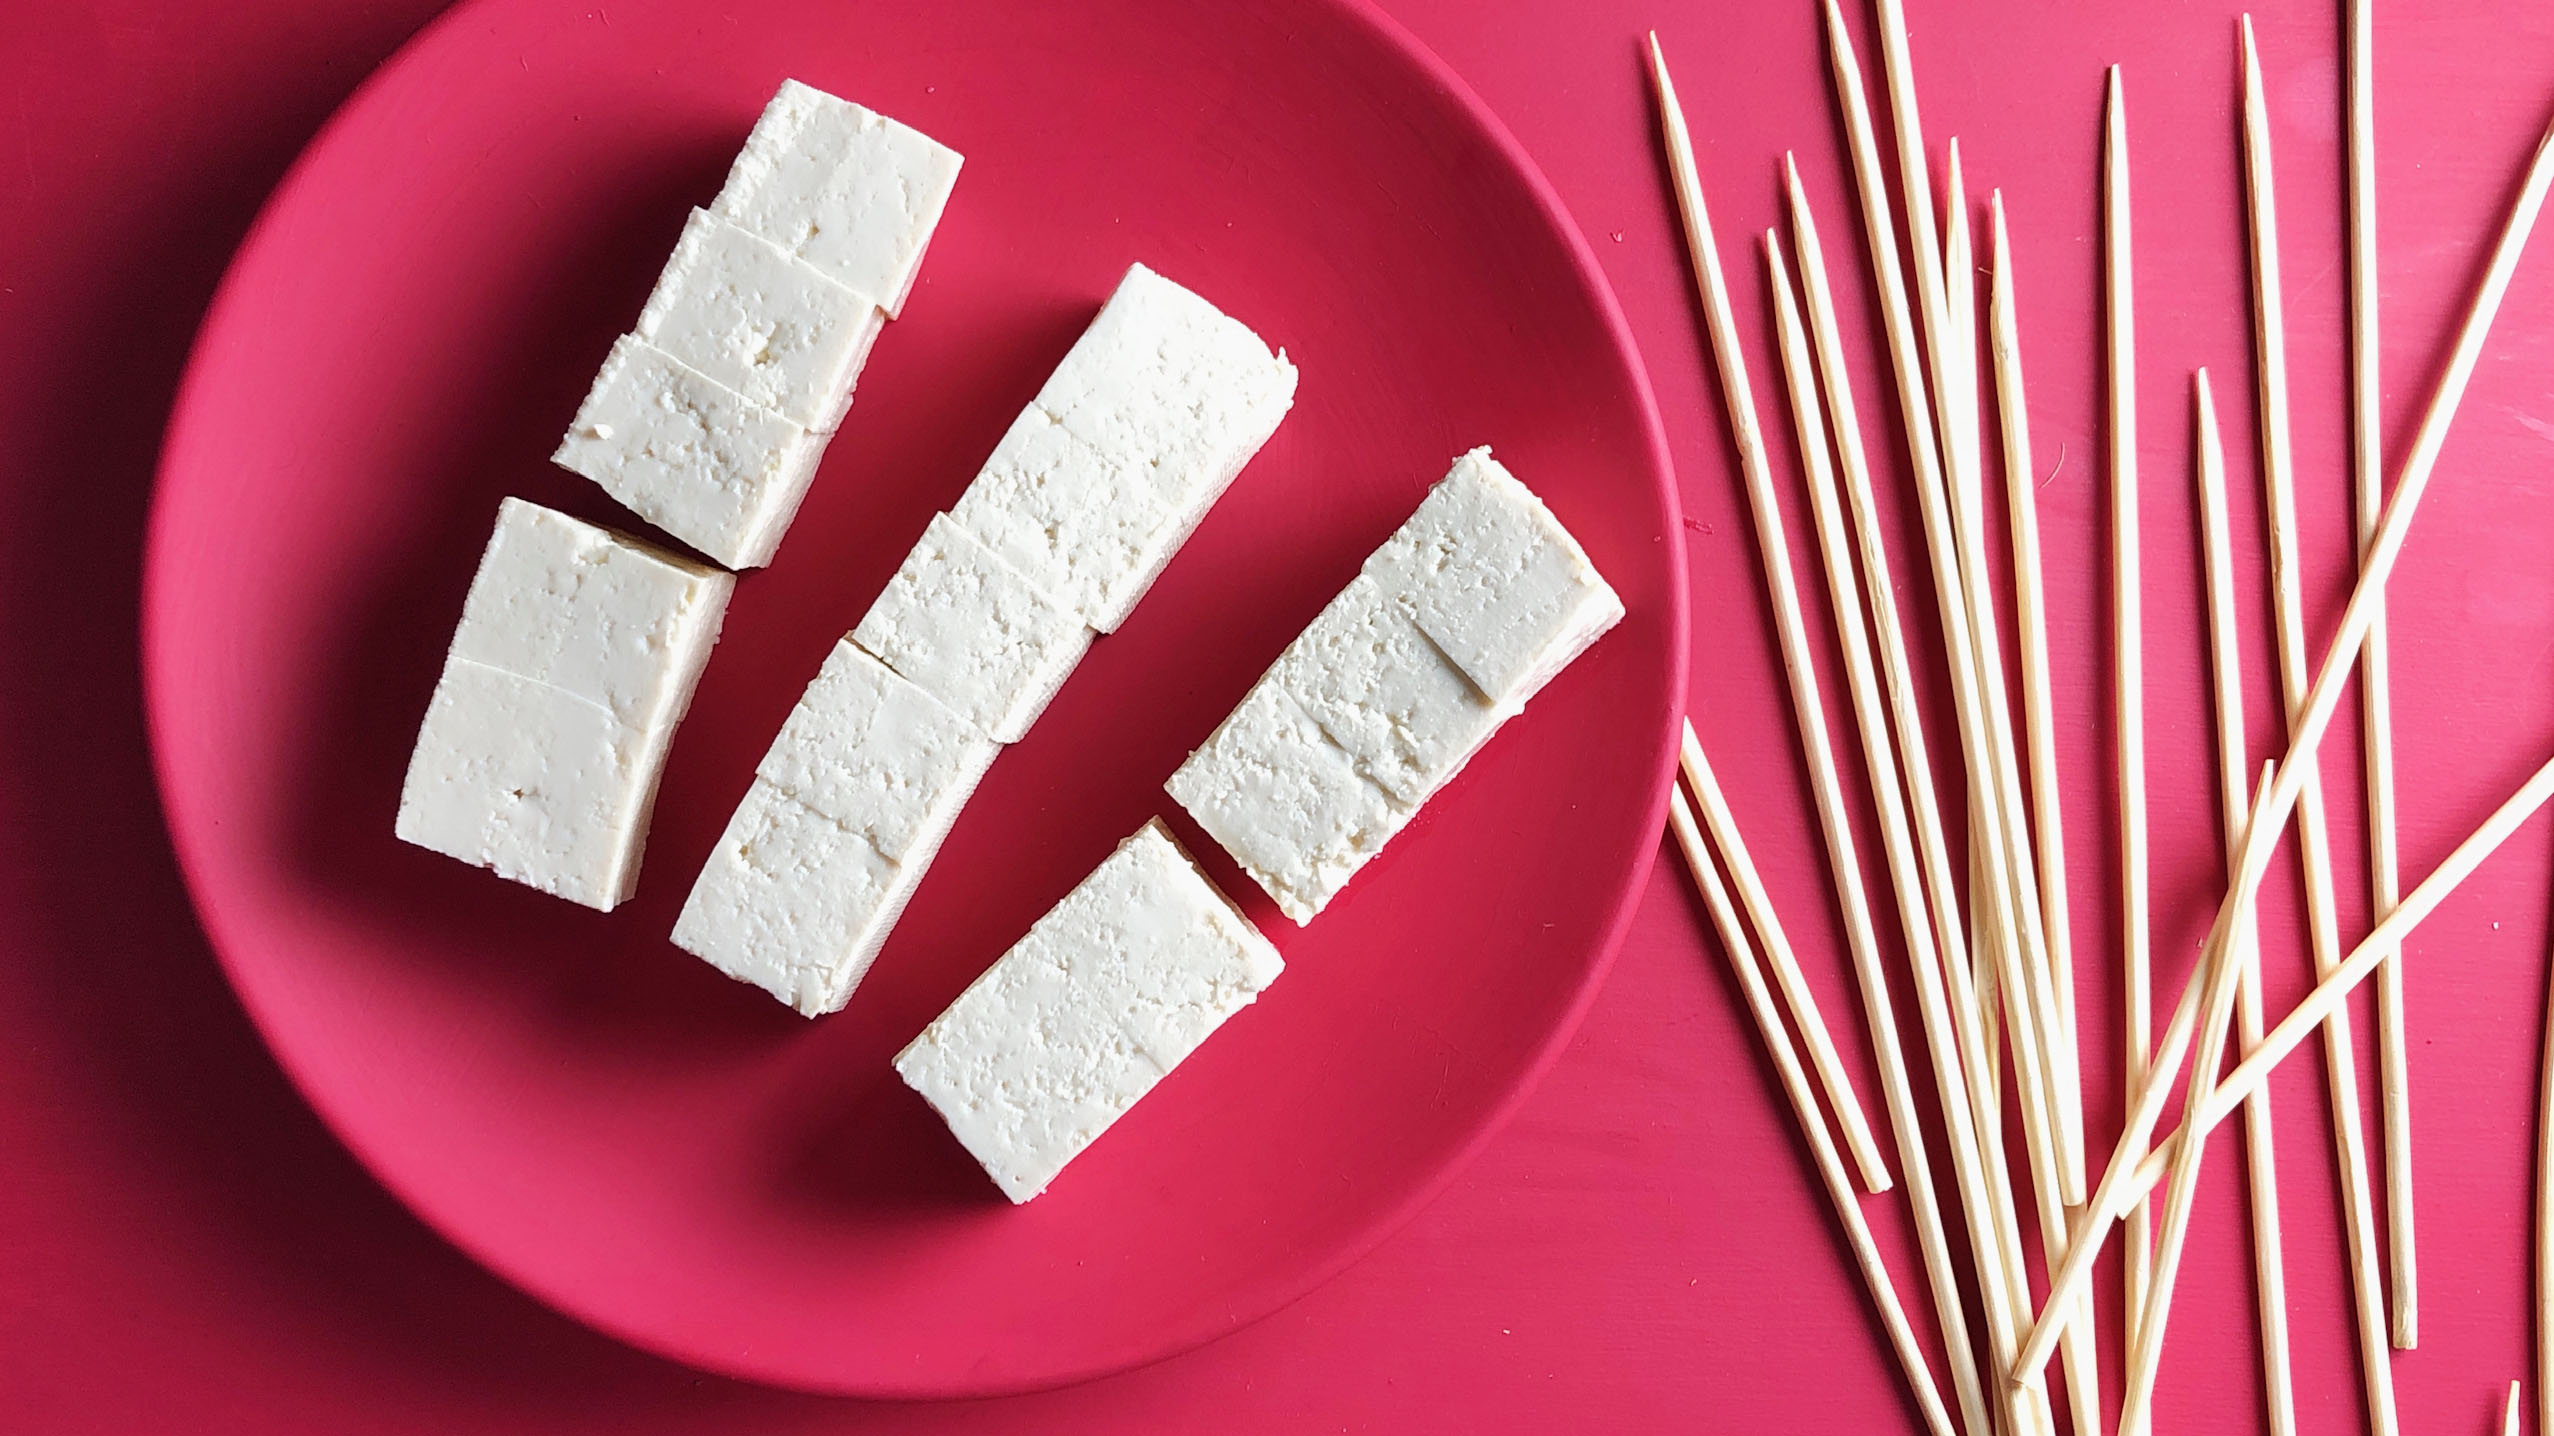 uncooked tofu cubes on a red plate